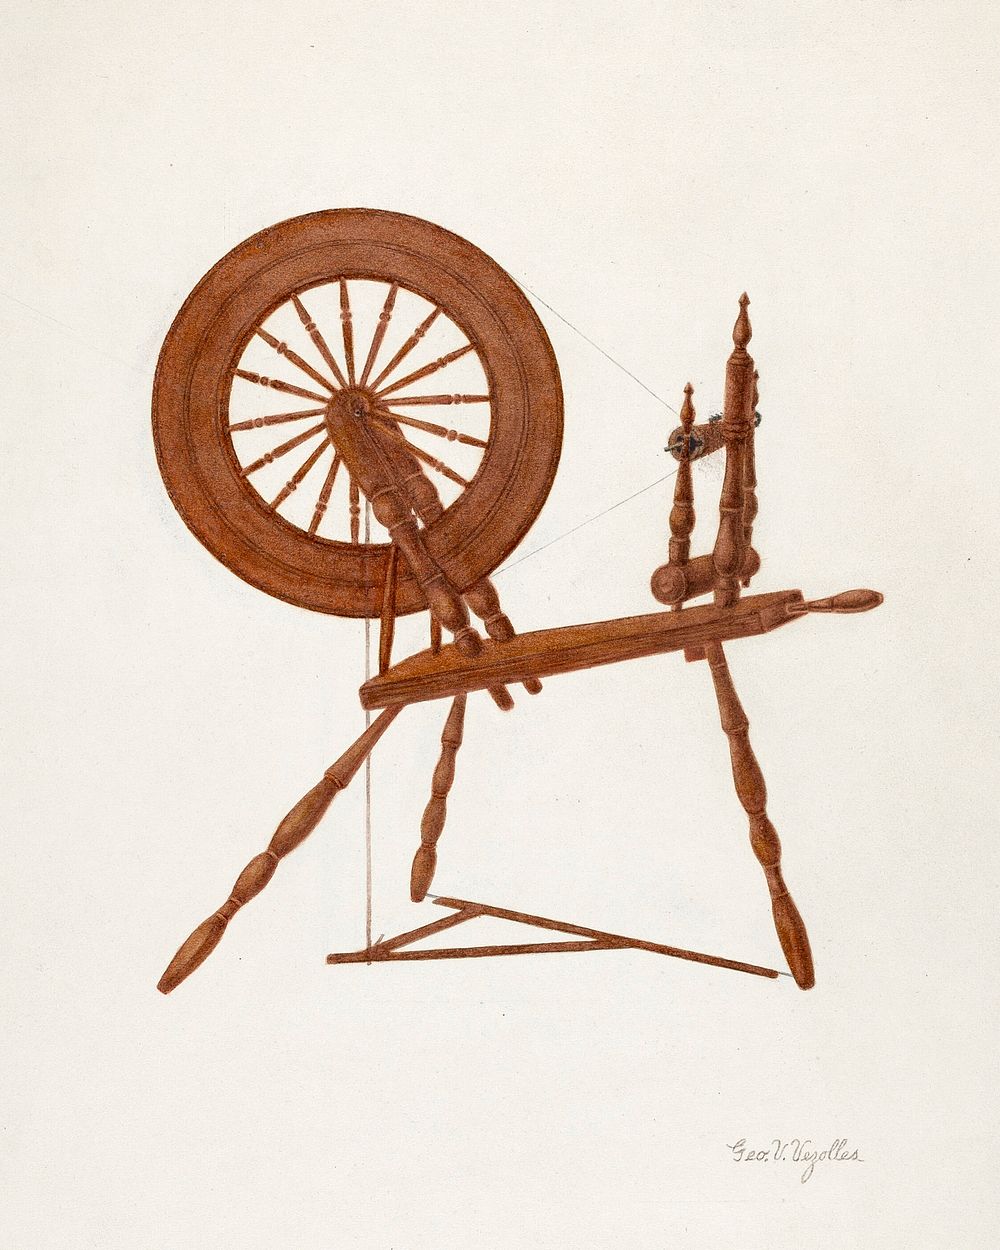 Shaker Spinning Wheel Flax (ca.1941) by George V. Vezolles. Original from The National Gallery of Art. Digitally enhanced by…